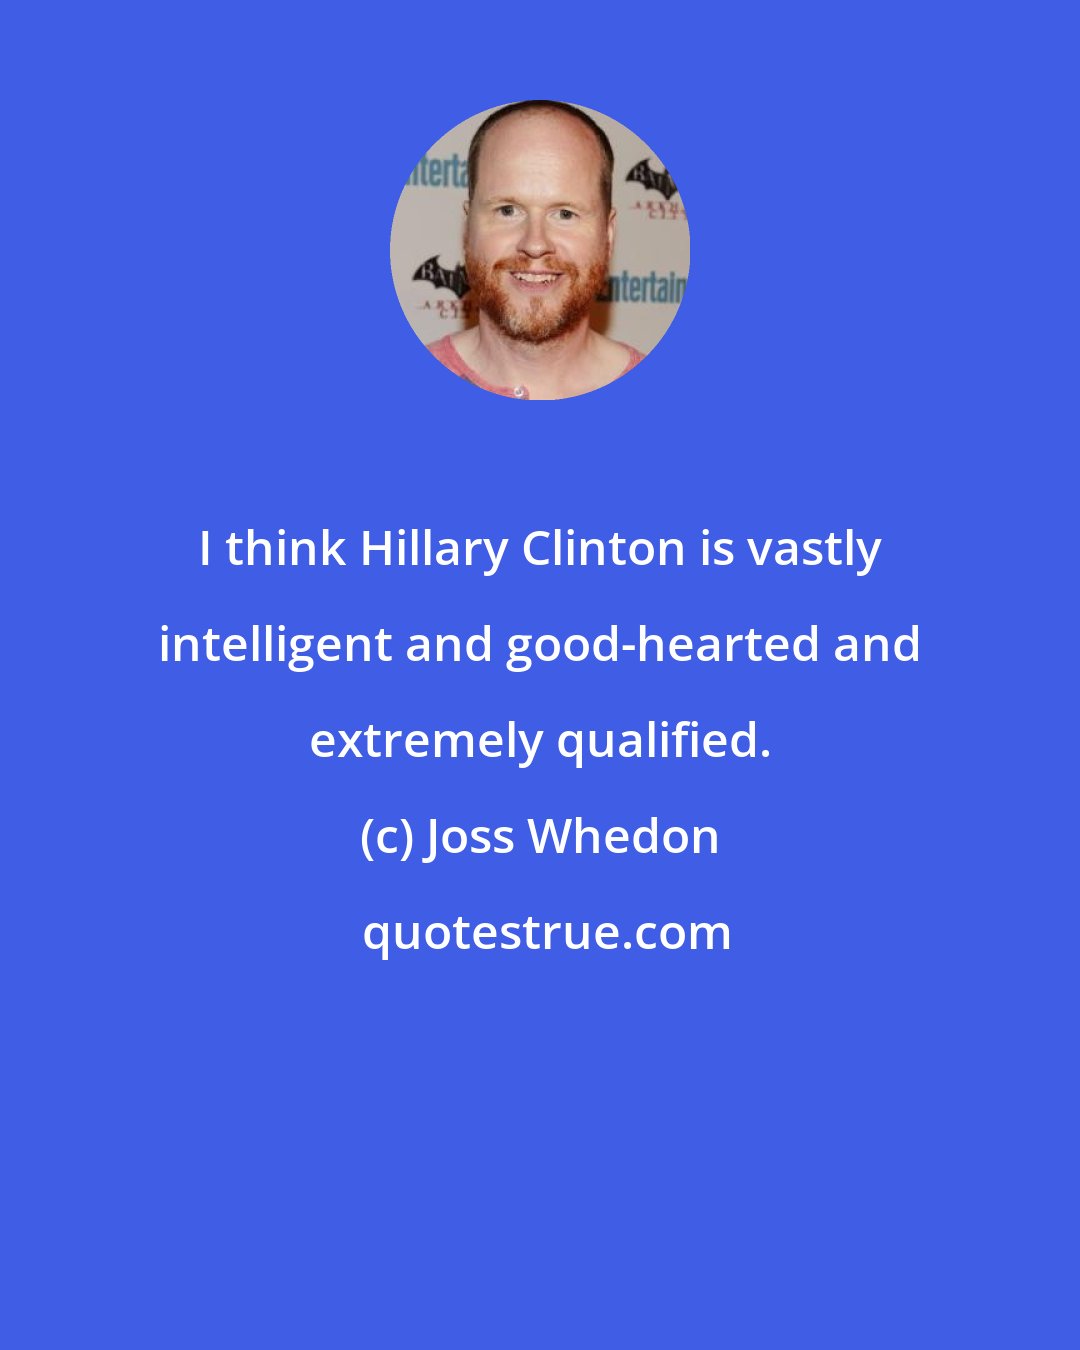 Joss Whedon: I think Hillary Clinton is vastly intelligent and good-hearted and extremely qualified.